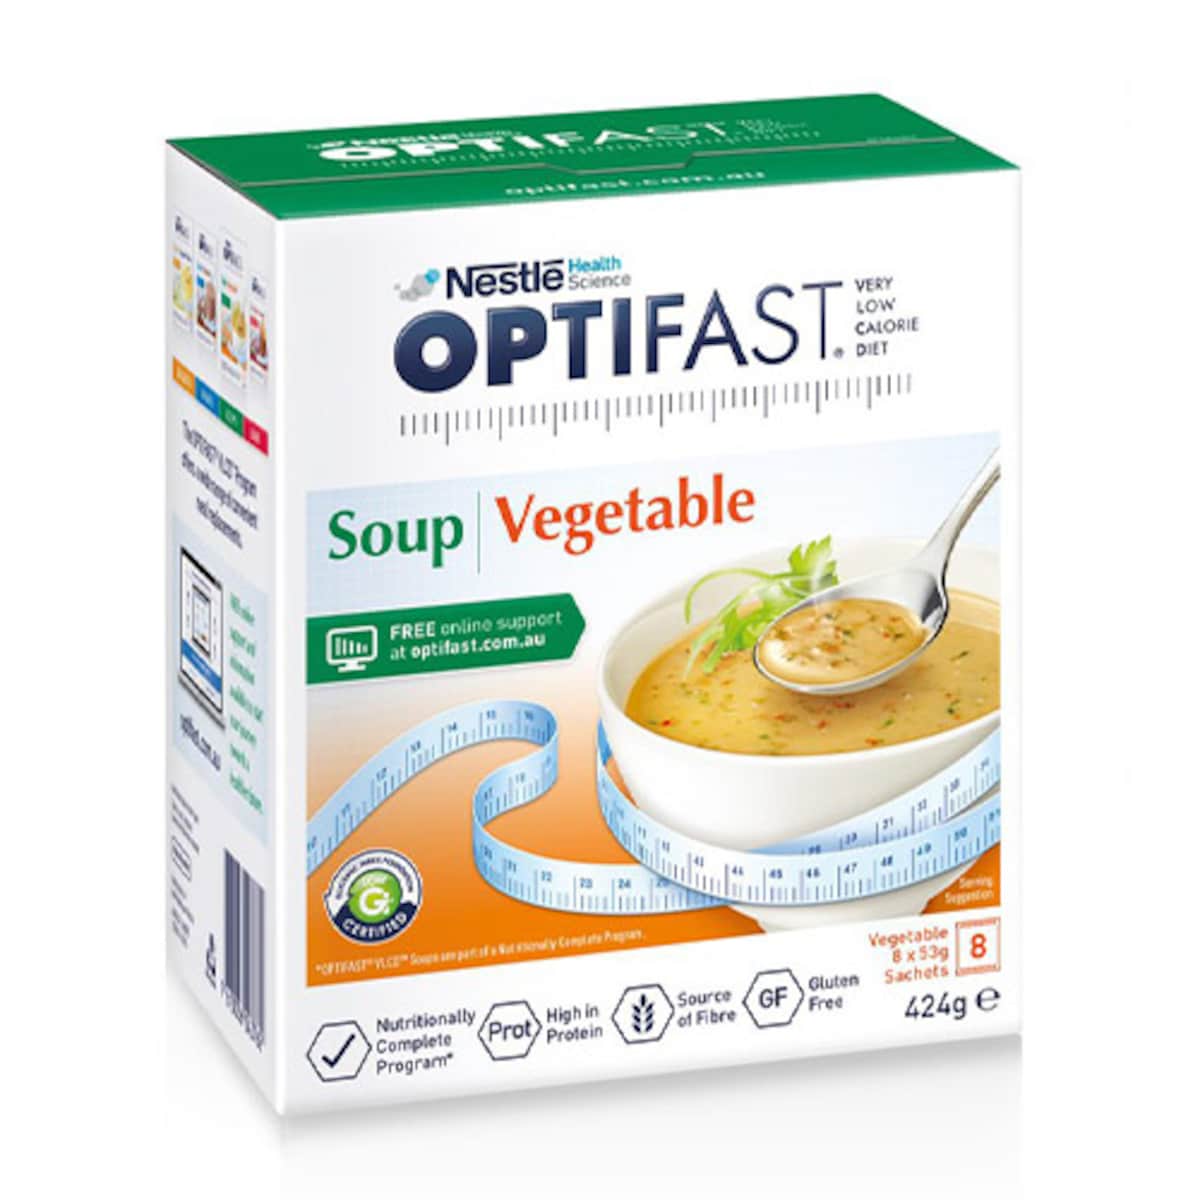 Optifast VLCD Soup Mixed Vegetable 8 Serves